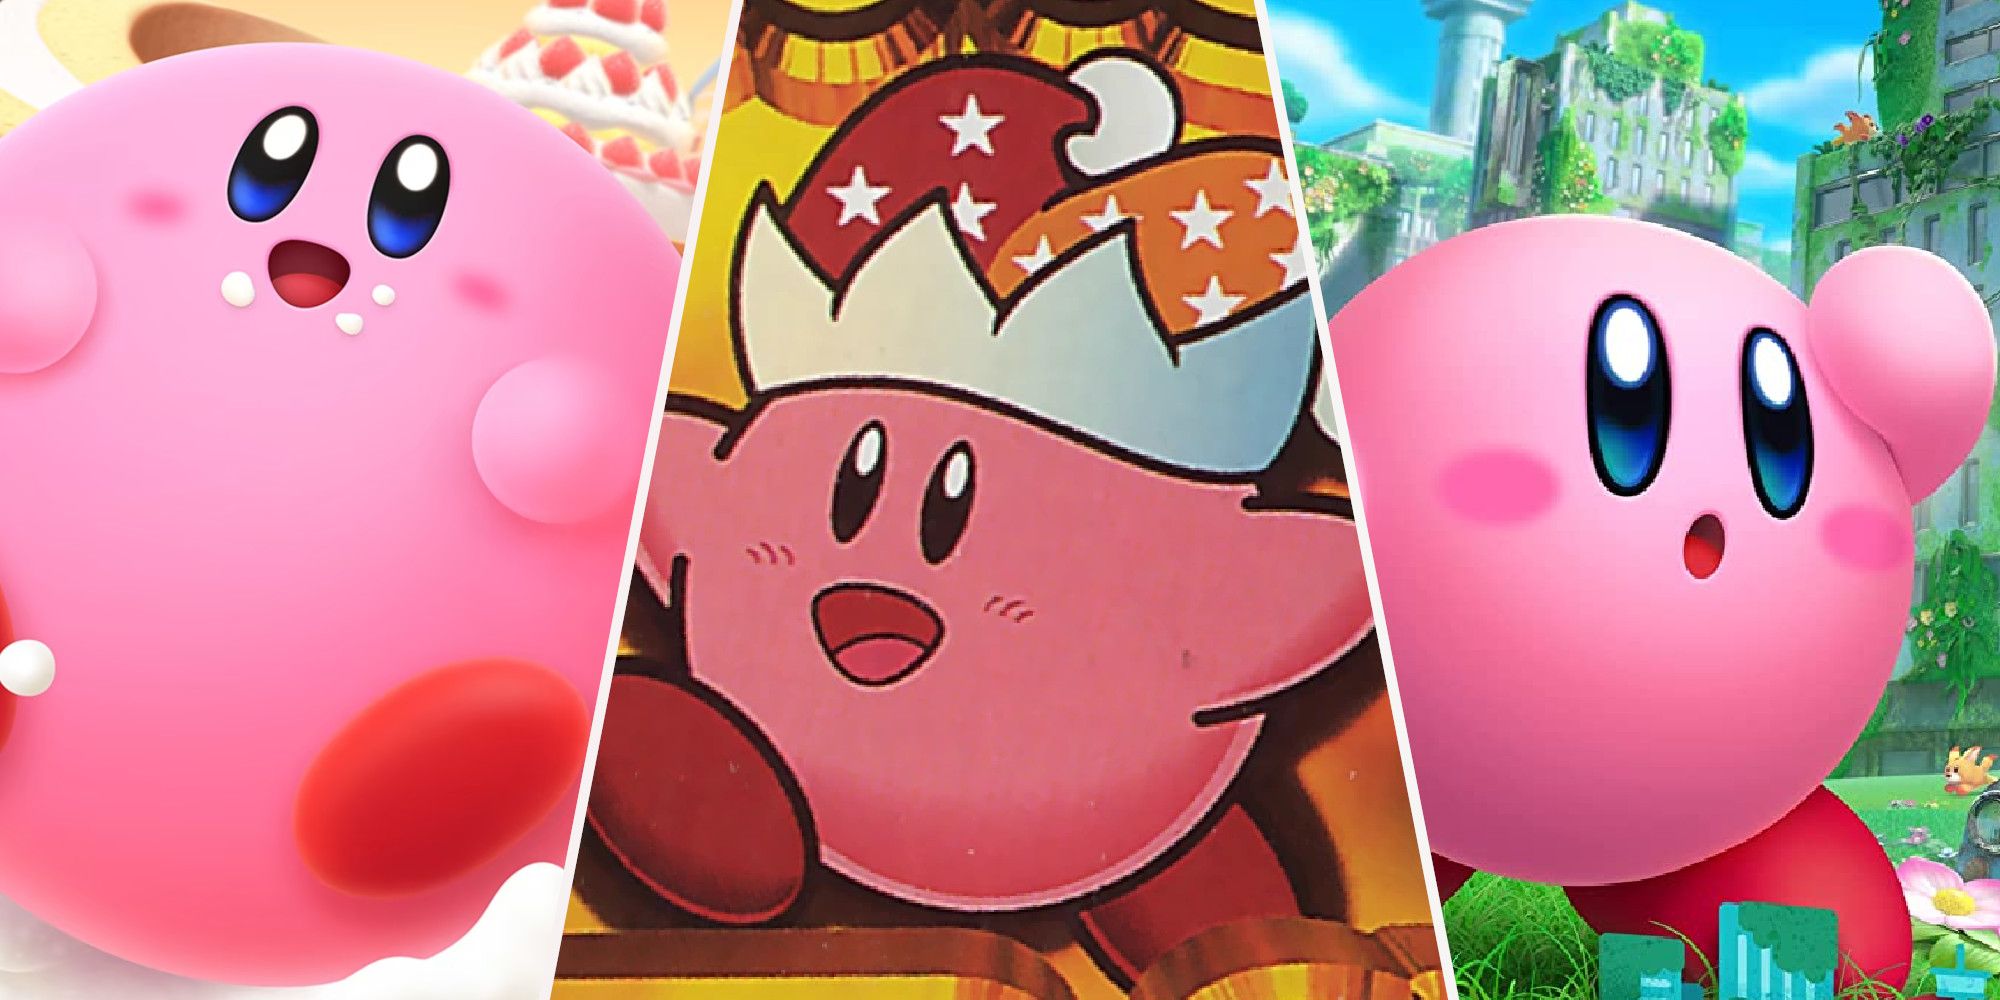 Kirby's Dream Buffet Cover, Kirby Super Star Cover, Kirby and the Forgotten Land Cover, from right to left